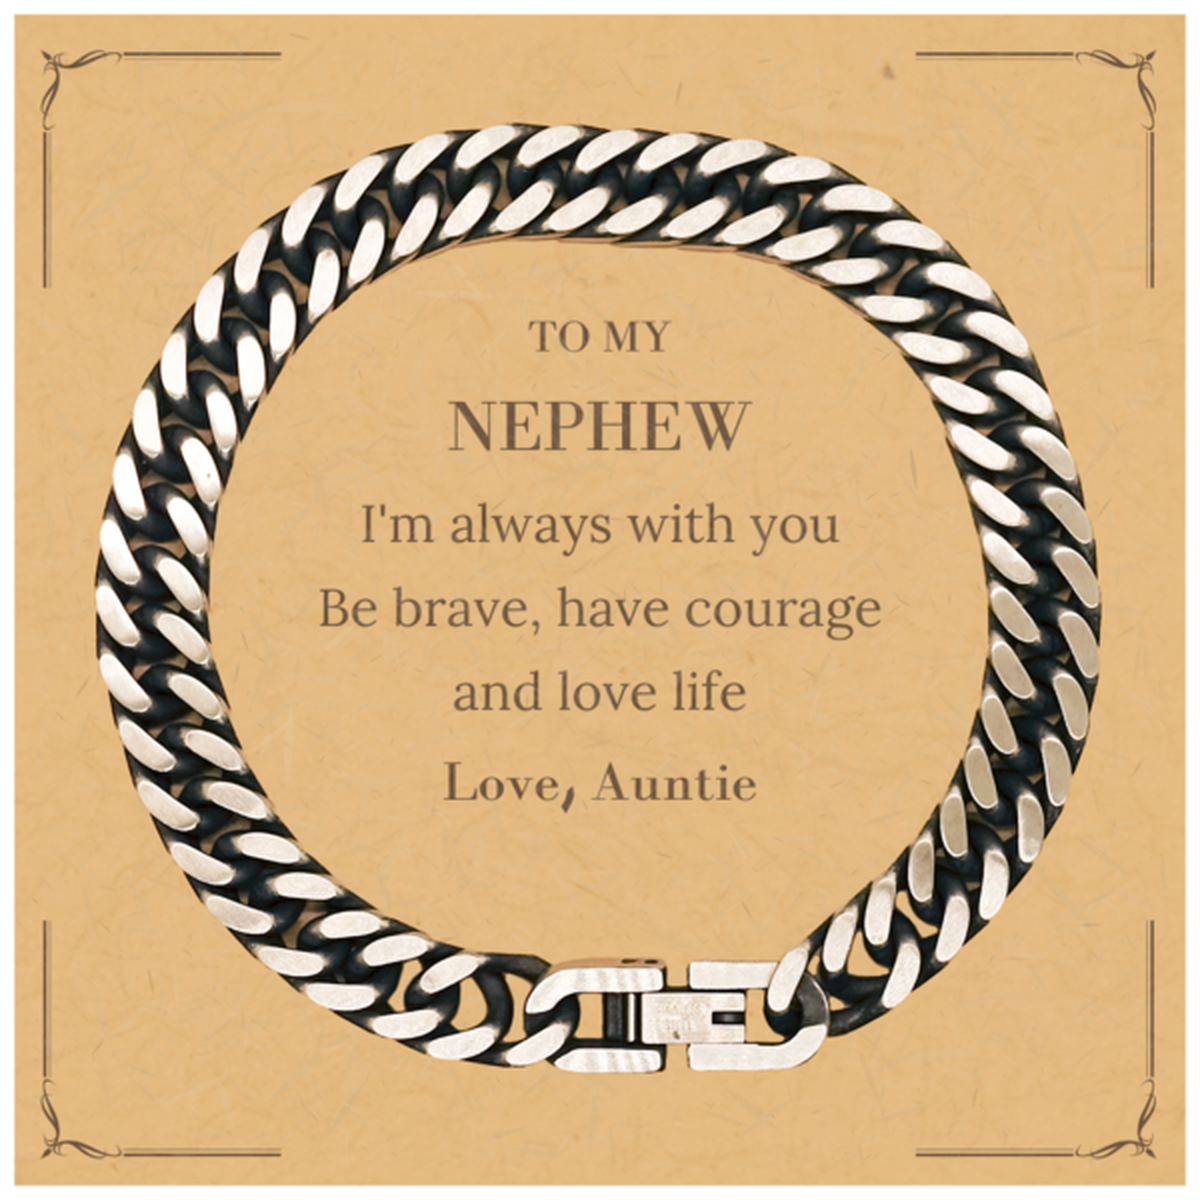 To My Nephew Gifts from Auntie, Unique Cuban Link Chain Bracelet Inspirational Christmas Birthday Graduation Gifts for Nephew I'm always with you. Be brave, have courage and love life. Love, Auntie